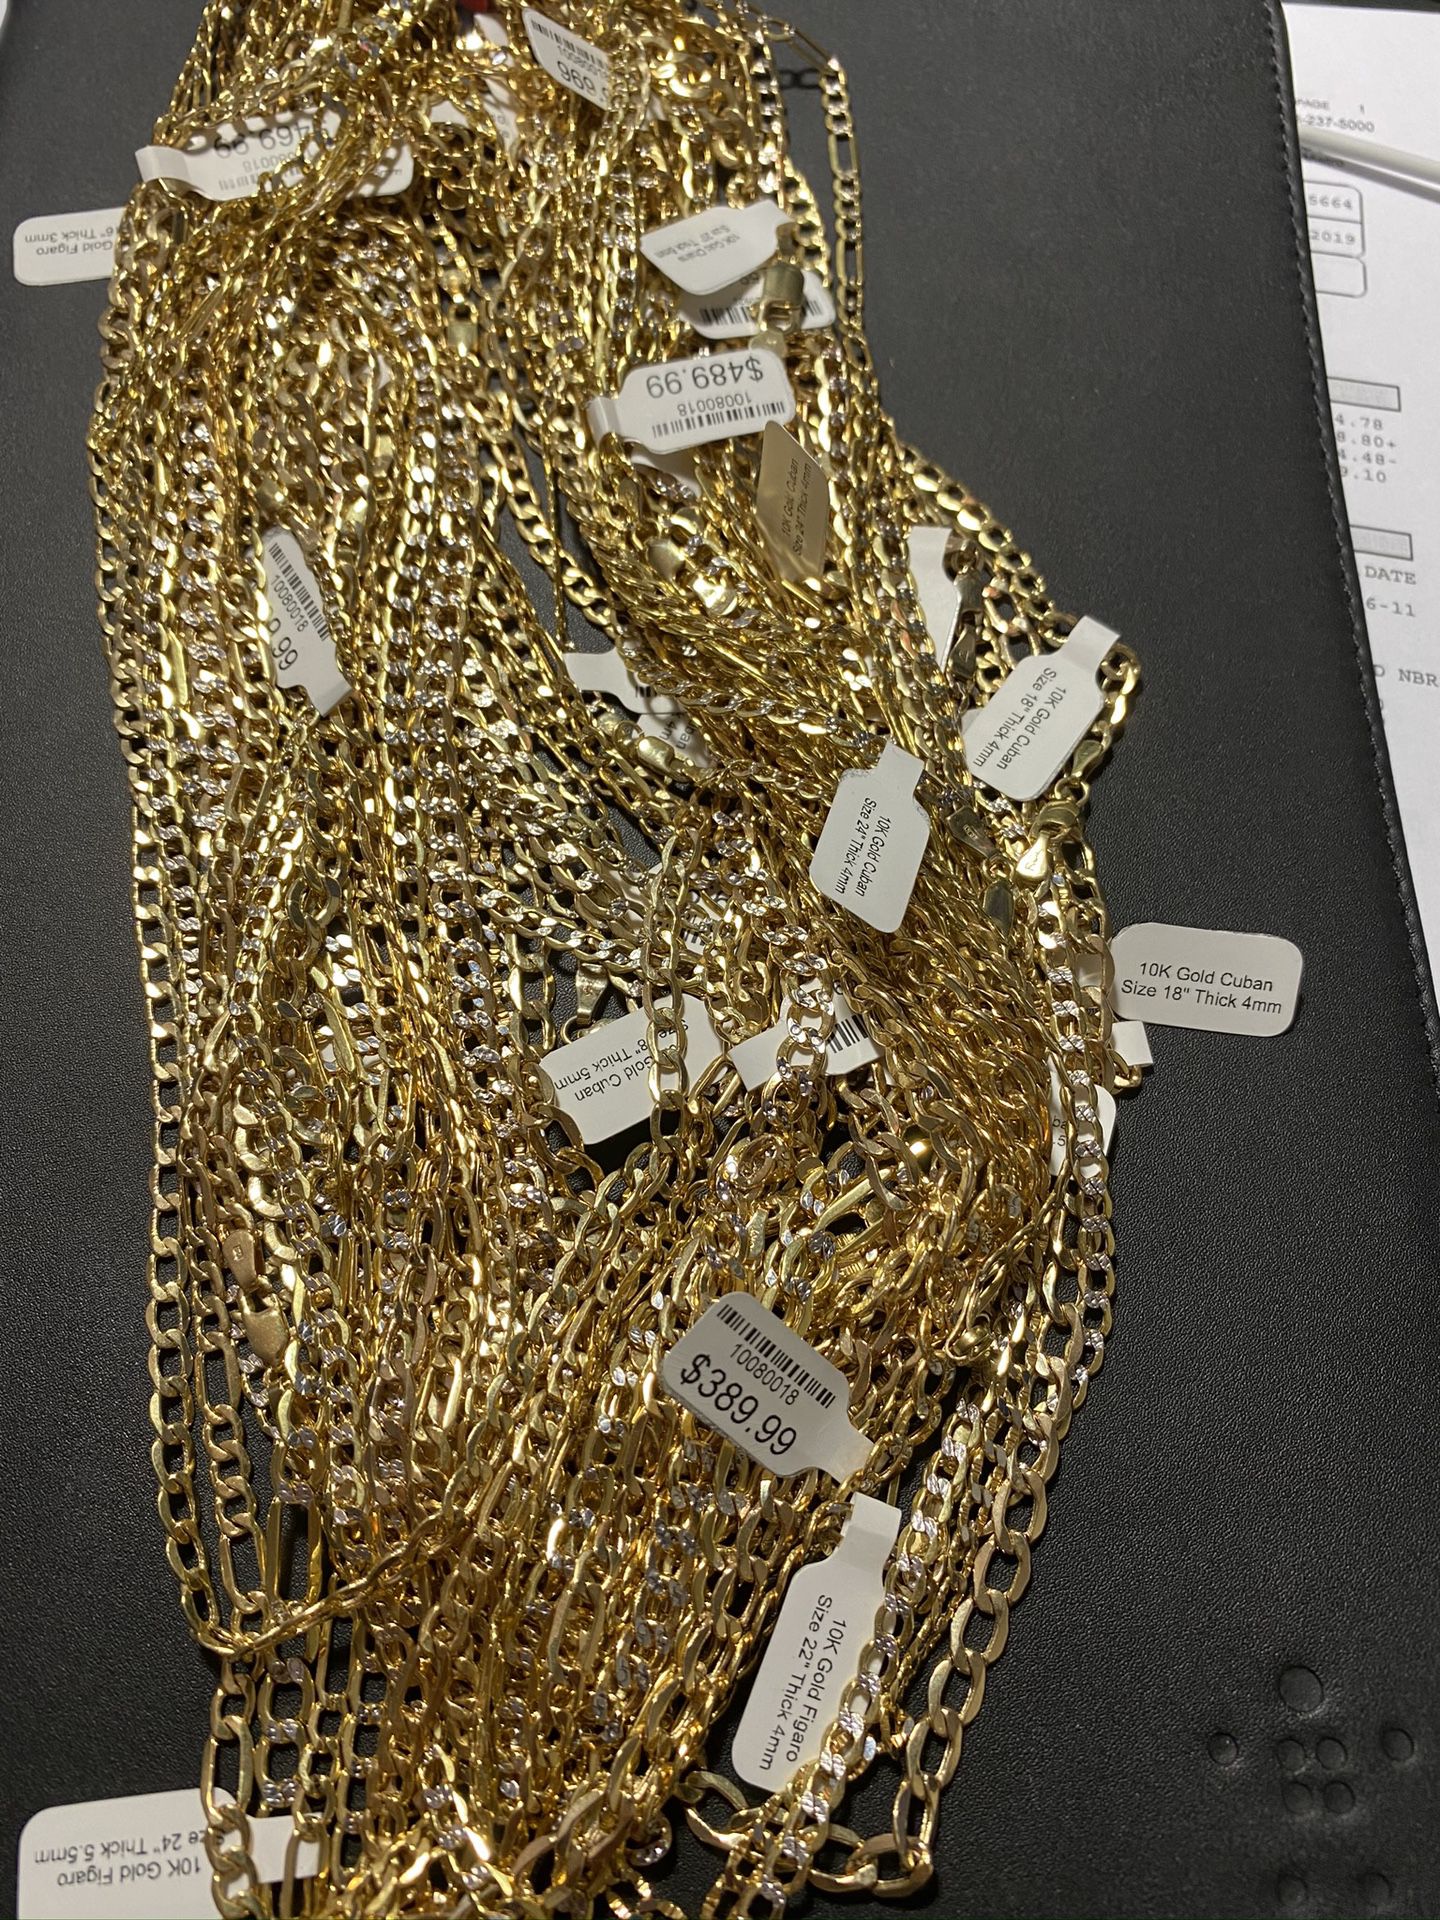 Gold chains for sale rope cubans and figaros thin and thick